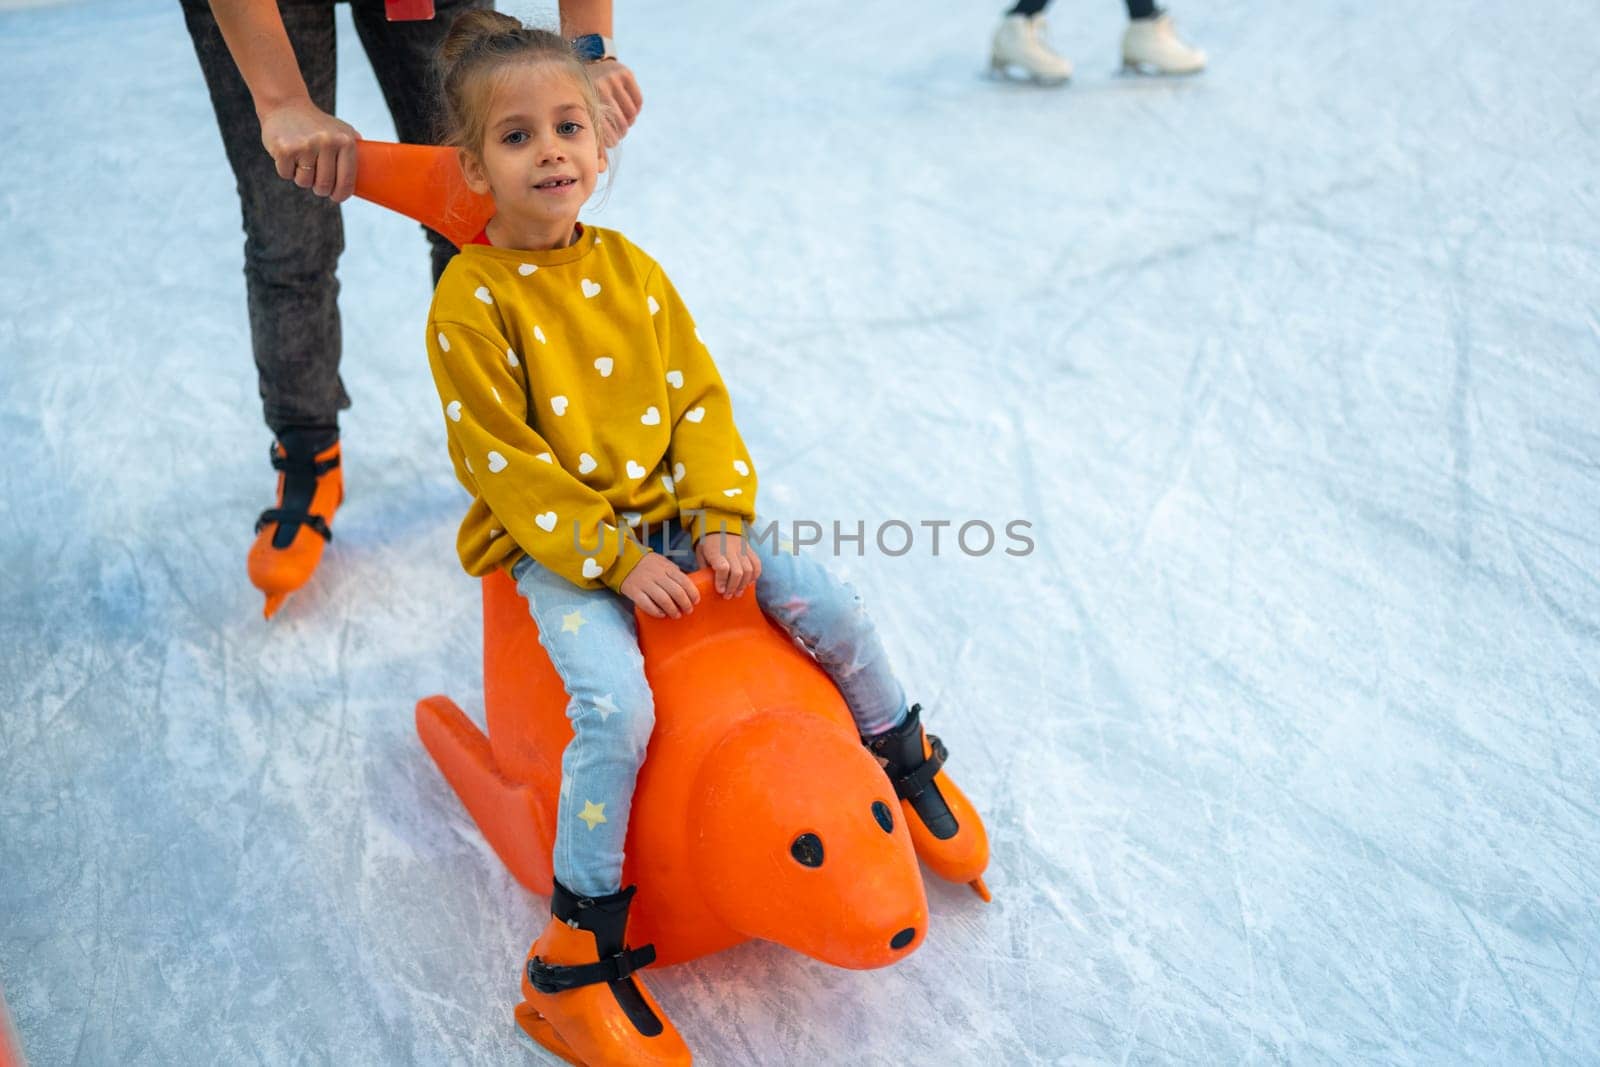 Child glides across ice rink on toy. Child glides across ice rink. Family socializing in winter, playing sports and having fun in snow. Daughter enjoying winter activities